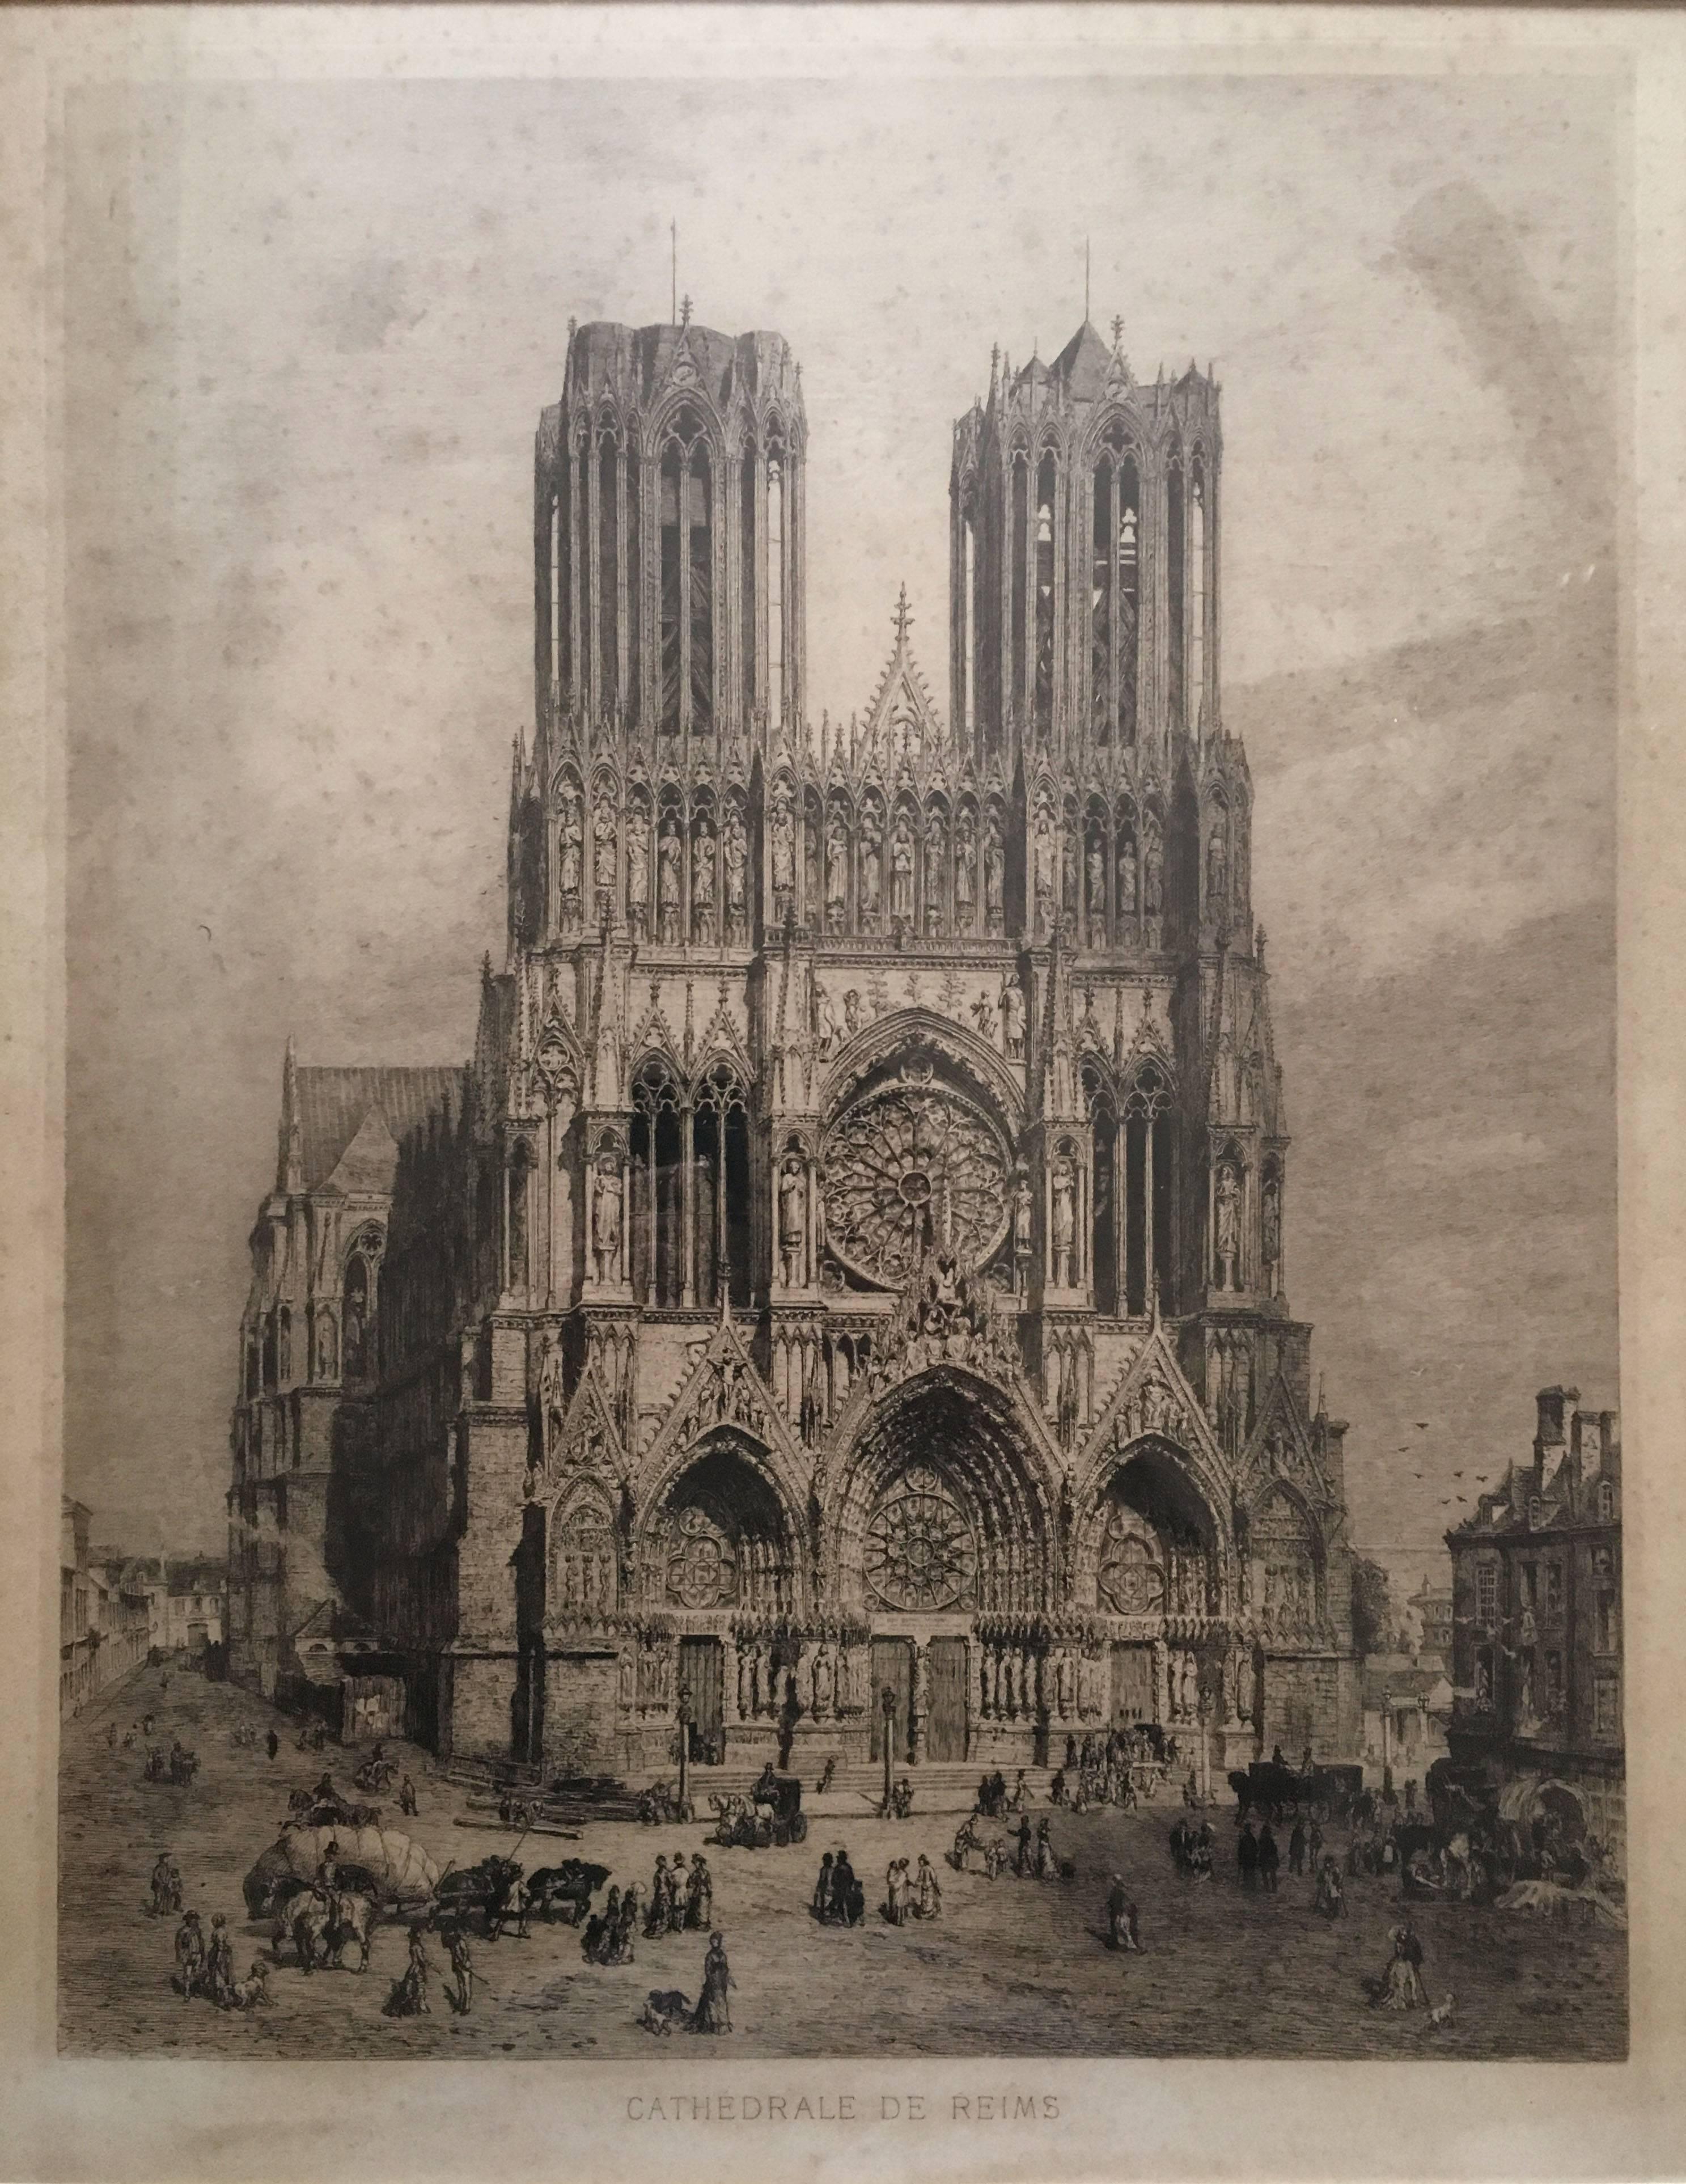 An excellent and large 19th century view of the portal of Reims Cathedral in Reims, France. The church is the seat of the Archdiocese of Reims and is the building in which the French Kings were crowned. This view likely follows the 1875 restoration